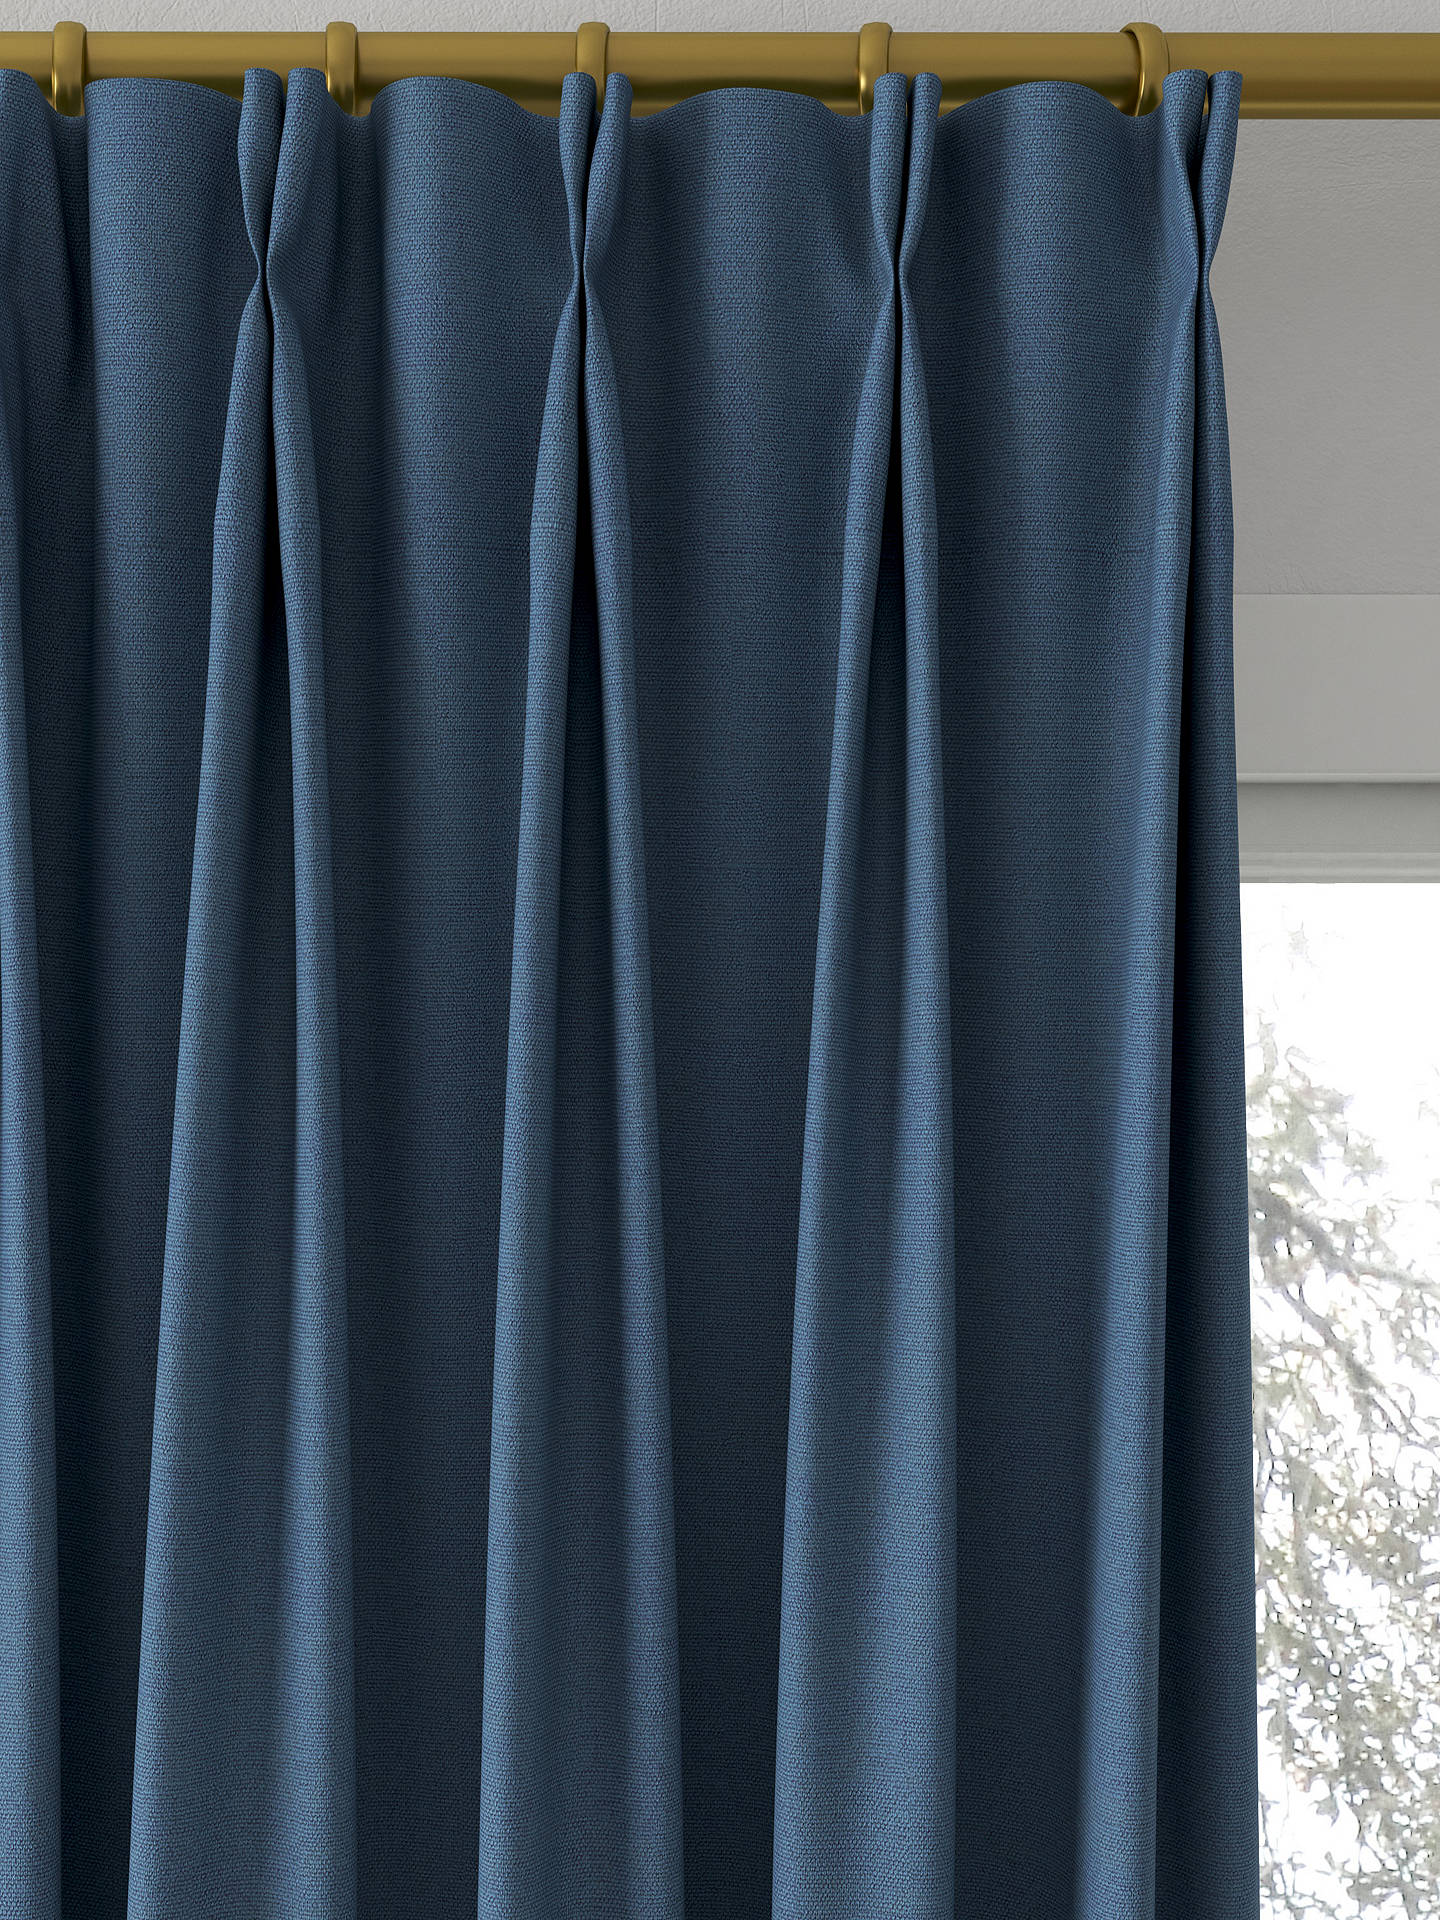 Designers Guild Madrid Made to Measure Curtains, Ocean